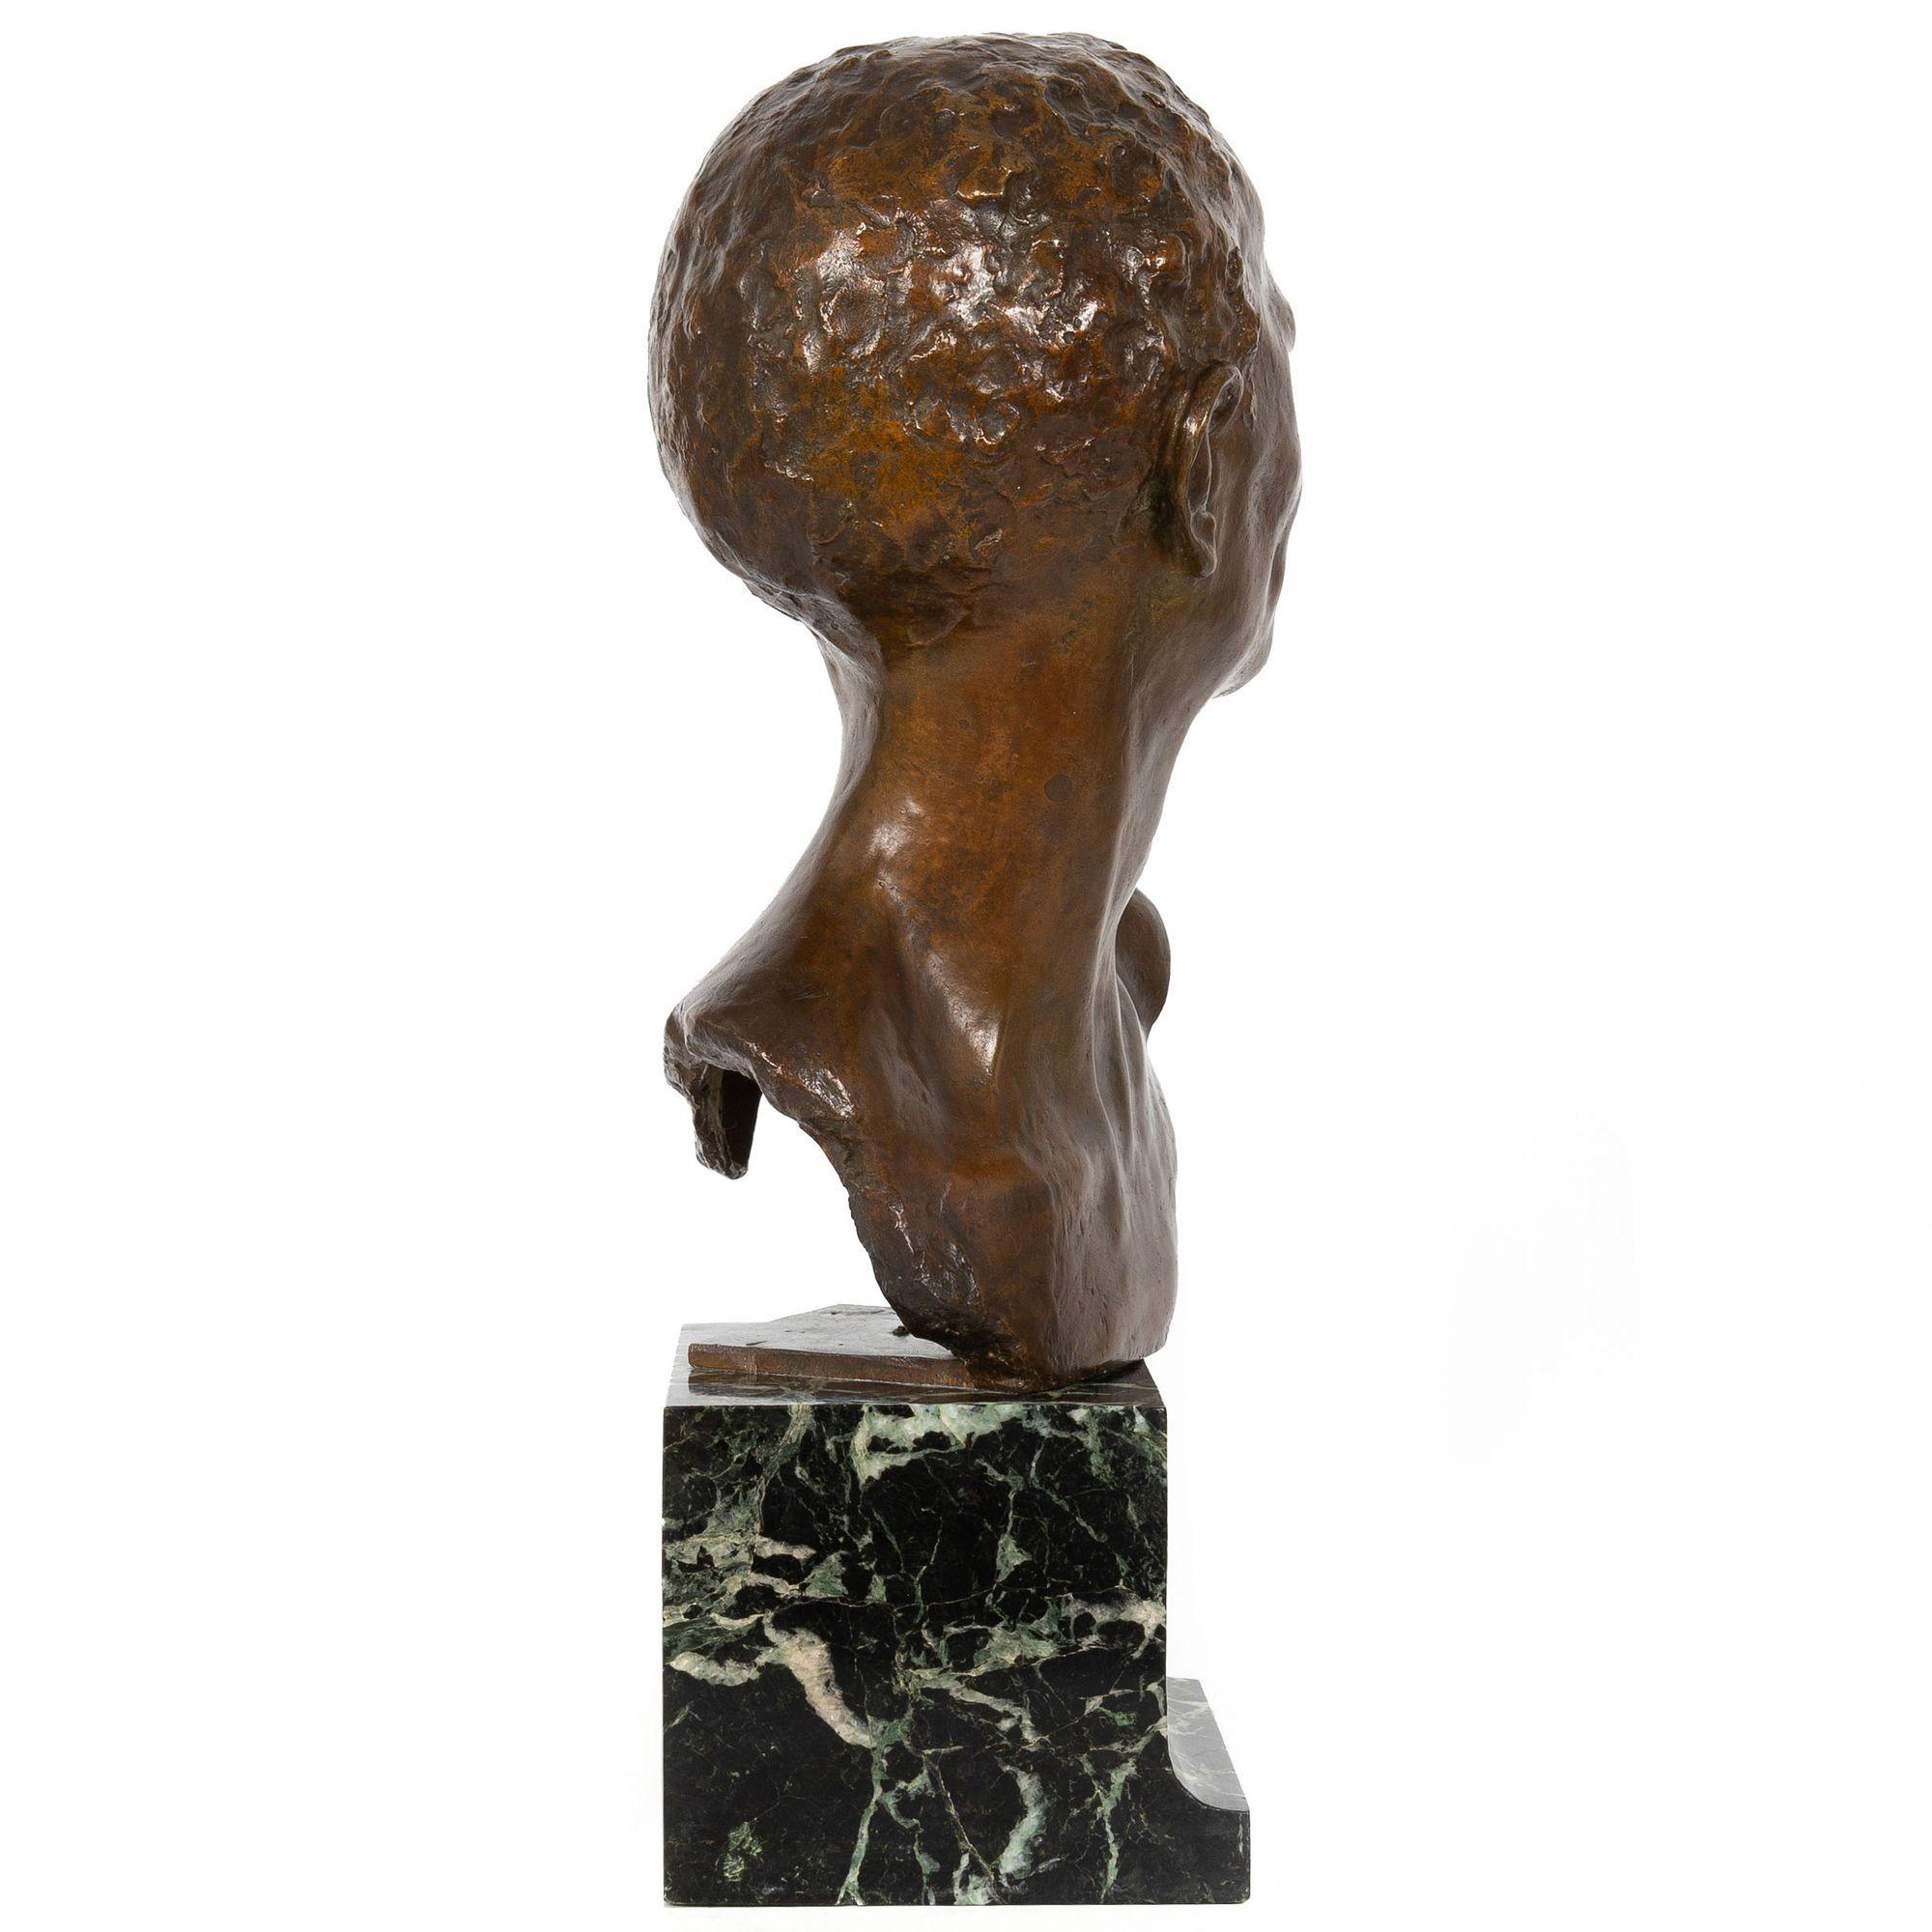 20th Century French Art Deco Modernist Bronze Sculpture, Bust of Young Man, Alfredo Pina For Sale